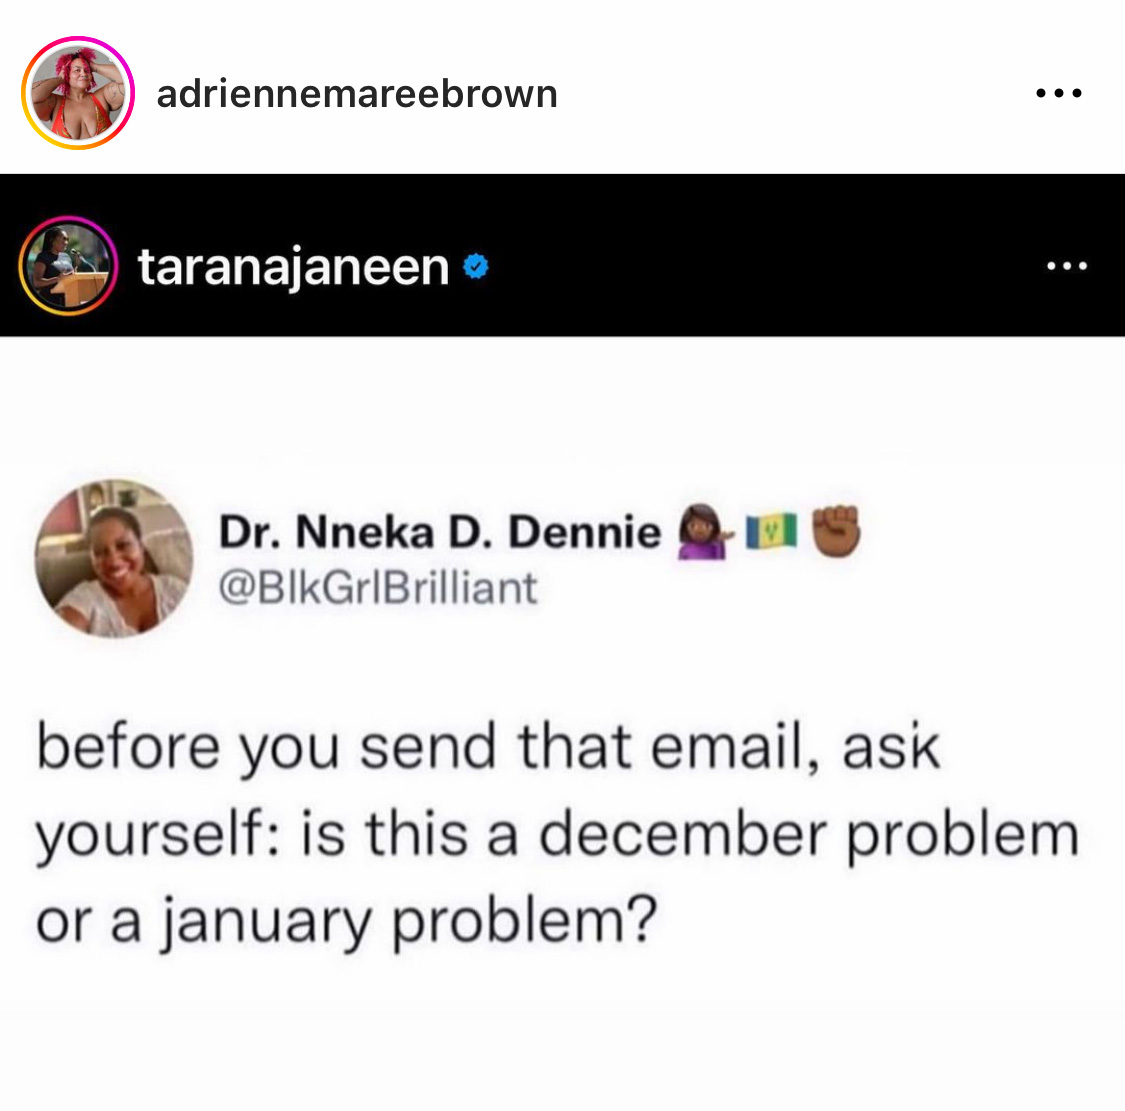 before you send that email, ask yourself: is this a december or a january problem?